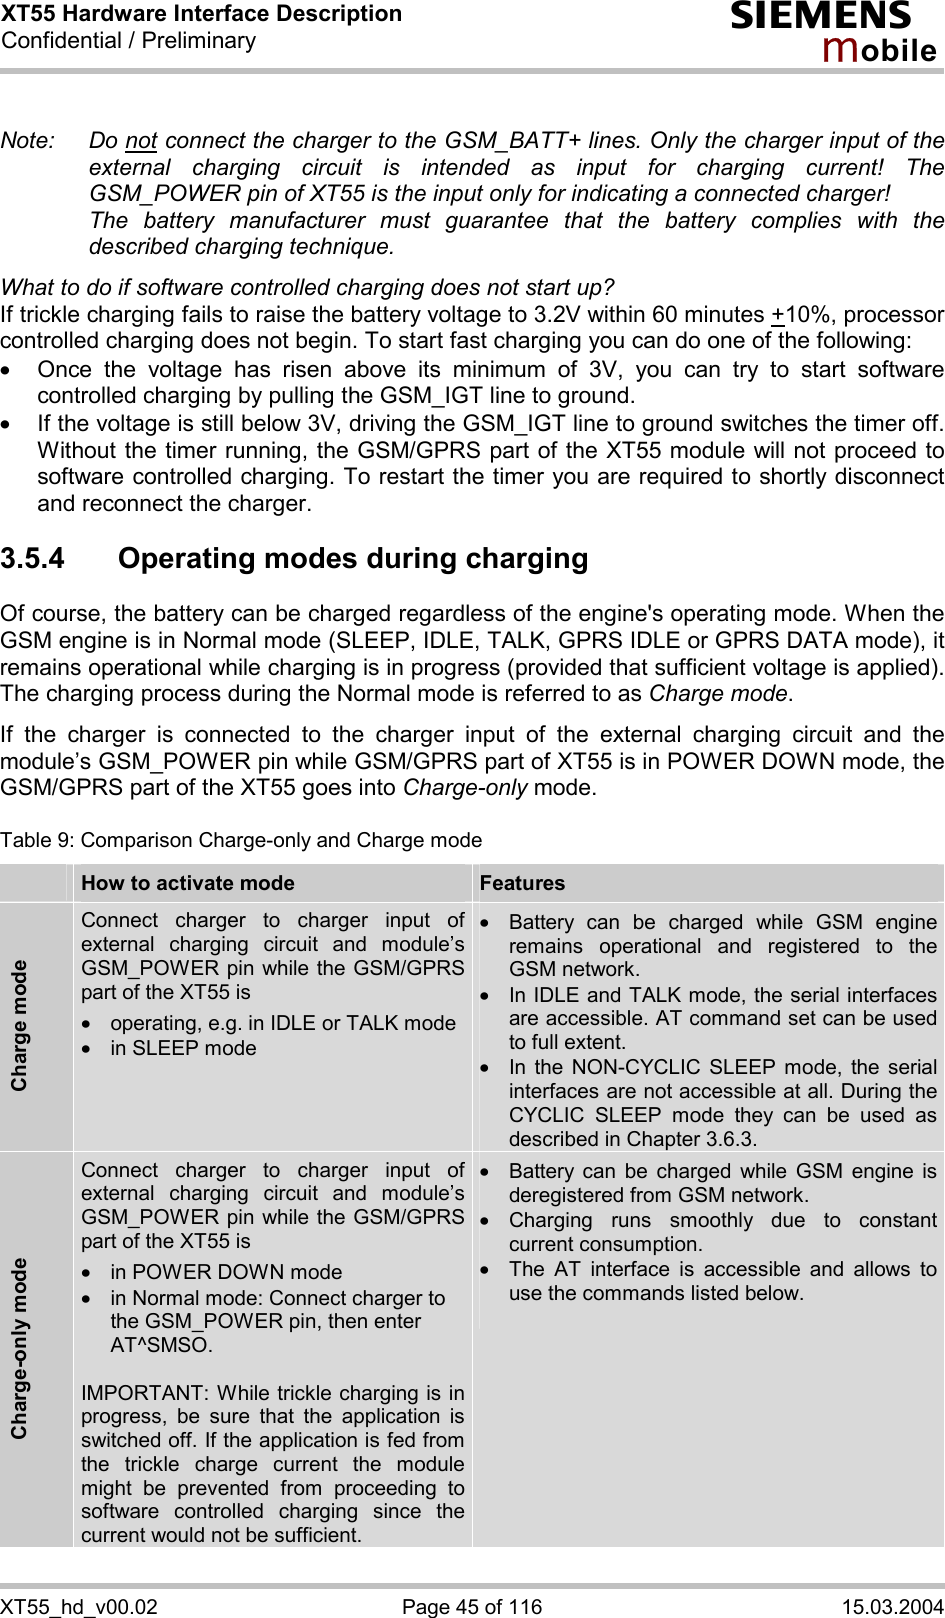 XT55 Hardware Interface Description Confidential / Preliminary s mo b i l e XT55_hd_v00.02  Page 45 of 116  15.03.2004  Note: Do not connect the charger to the GSM_BATT+ lines. Only the charger input of the external charging circuit is intended as input for charging current! The GSM_POWER pin of XT55 is the input only for indicating a connected charger!   The battery manufacturer must guarantee that the battery complies with the described charging technique.   What to do if software controlled charging does not start up? If trickle charging fails to raise the battery voltage to 3.2V within 60 minutes +10%, processor controlled charging does not begin. To start fast charging you can do one of the following:  ·  Once the voltage has risen above its minimum of 3V, you can try to start software controlled charging by pulling the GSM_IGT line to ground.  ·  If the voltage is still below 3V, driving the GSM_IGT line to ground switches the timer off. Without the timer running, the GSM/GPRS part of the XT55 module will not proceed to software controlled charging. To restart the timer you are required to shortly disconnect and reconnect the charger. 3.5.4 Operating modes during charging Of course, the battery can be charged regardless of the engine&apos;s operating mode. When the GSM engine is in Normal mode (SLEEP, IDLE, TALK, GPRS IDLE or GPRS DATA mode), it remains operational while charging is in progress (provided that sufficient voltage is applied). The charging process during the Normal mode is referred to as Charge mode.   If the charger is connected to the charger input of the external charging circuit and the module’s GSM_POWER pin while GSM/GPRS part of XT55 is in POWER DOWN mode, the GSM/GPRS part of the XT55 goes into Charge-only mode.   Table 9: Comparison Charge-only and Charge mode  How to activate mode  Features Charge mode Connect charger to charger input of external charging circuit and module’s GSM_POWER pin while the GSM/GPRS part of the XT55 is ·  operating, e.g. in IDLE or TALK mode ·  in SLEEP mode ·  Battery can be charged while GSM engine remains operational and registered to the GSM network. ·  In IDLE and TALK mode, the serial interfaces are accessible. AT command set can be used to full extent. ·  In the NON-CYCLIC SLEEP mode, the serial interfaces are not accessible at all. During the CYCLIC SLEEP mode they can be used as described in Chapter 3.6.3. Charge-only mode Connect charger to charger input of external charging circuit and module’s GSM_POWER pin while the GSM/GPRS part of the XT55 is ·  in POWER DOWN mode ·  in Normal mode: Connect charger to the GSM_POWER pin, then enter AT^SMSO.  IMPORTANT: While trickle charging is in progress, be sure that the application is switched off. If the application is fed from the trickle charge current the module might be prevented from proceeding to software controlled charging since the current would not be sufficient.  ·  Battery can be charged while GSM engine is deregistered from GSM network. ·  Charging runs smoothly due to constant current consumption. ·  The AT interface is accessible and allows to use the commands listed below.   